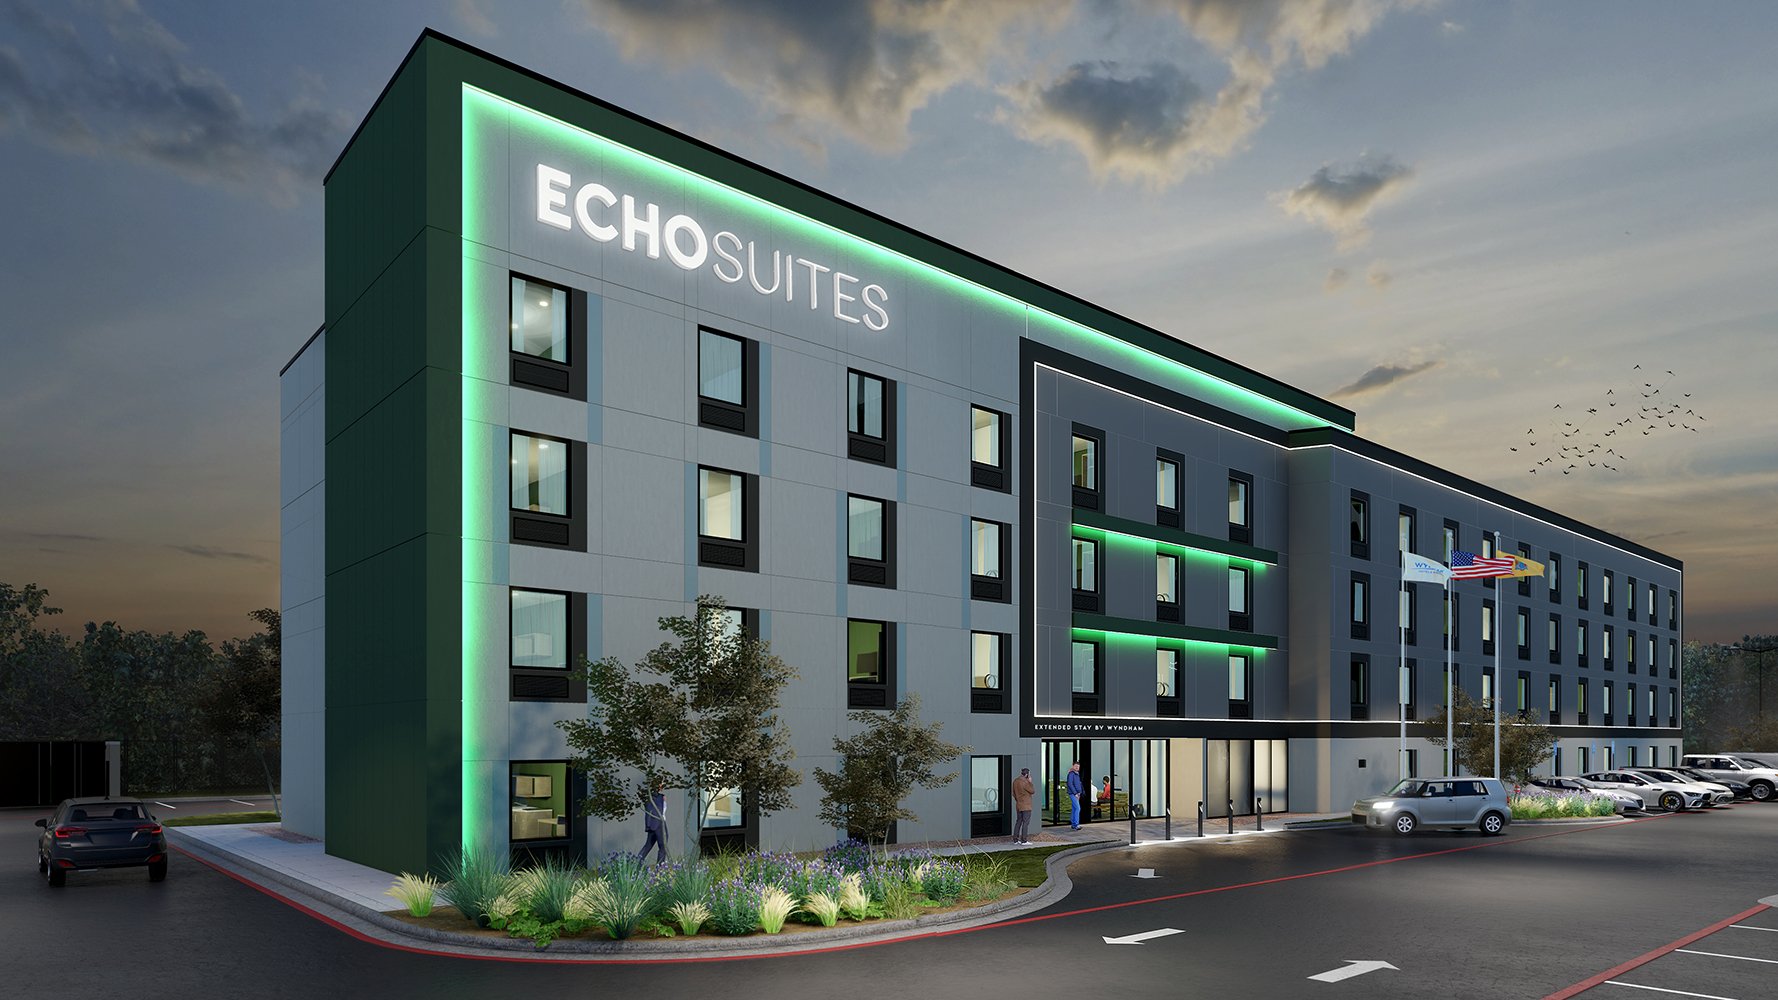 The new-build 124-room ECHO Suites prototype requires just under two acres of land 